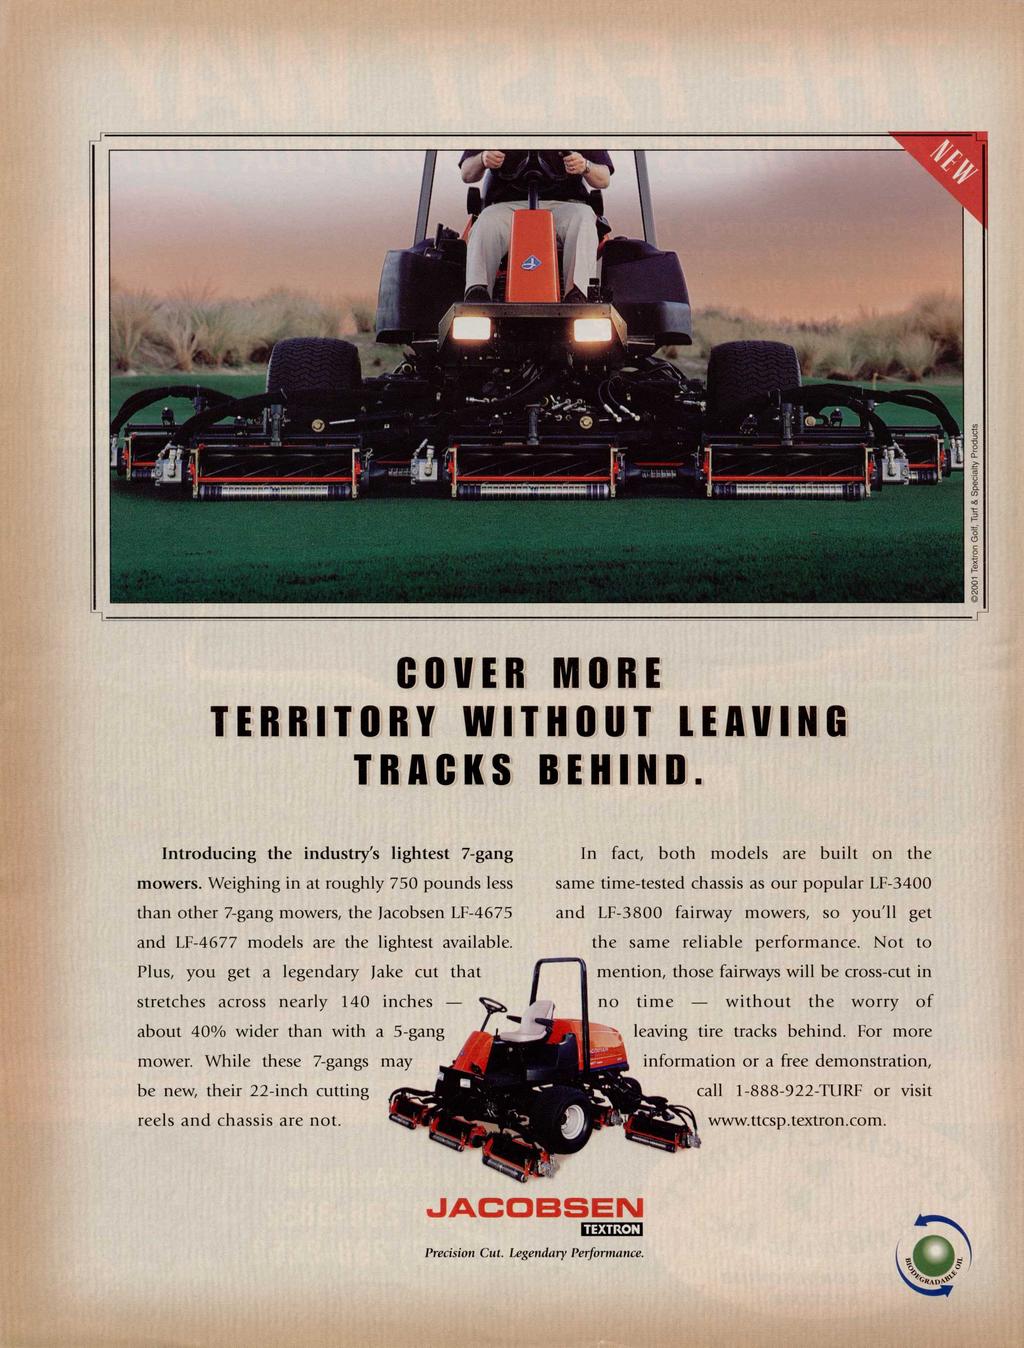 COVER MORI TERRITORY WITHOUT LEAVING TRACKS REHIND. Introducing the industry's lightest 7-gang mowers.